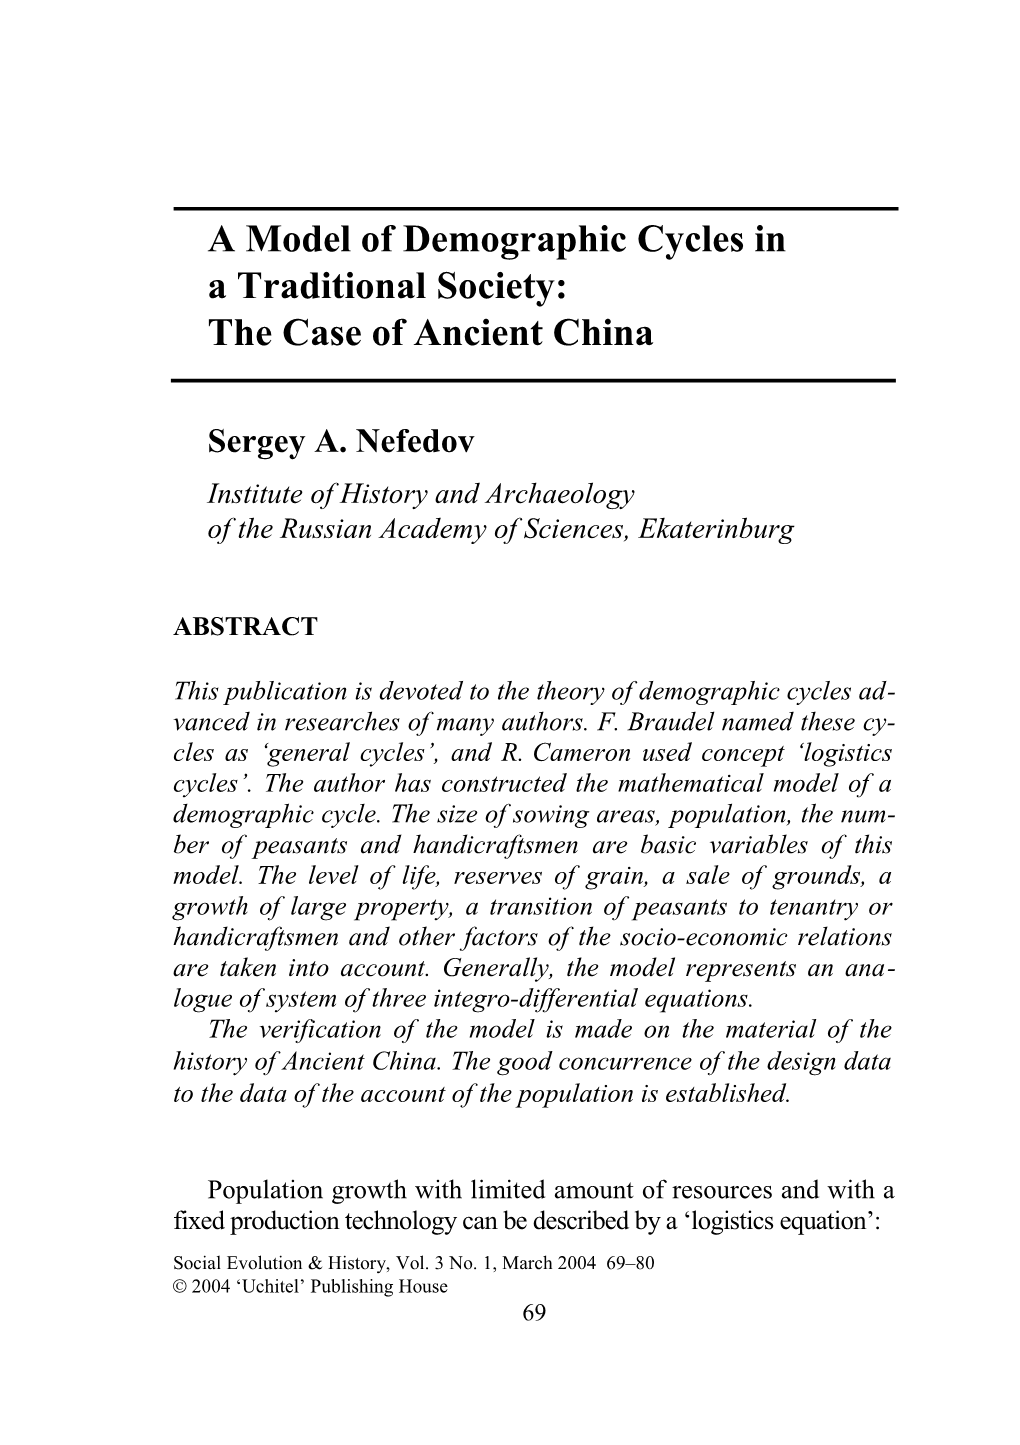 Nefedov / Model of Demographic Cycles in a Traditional Society